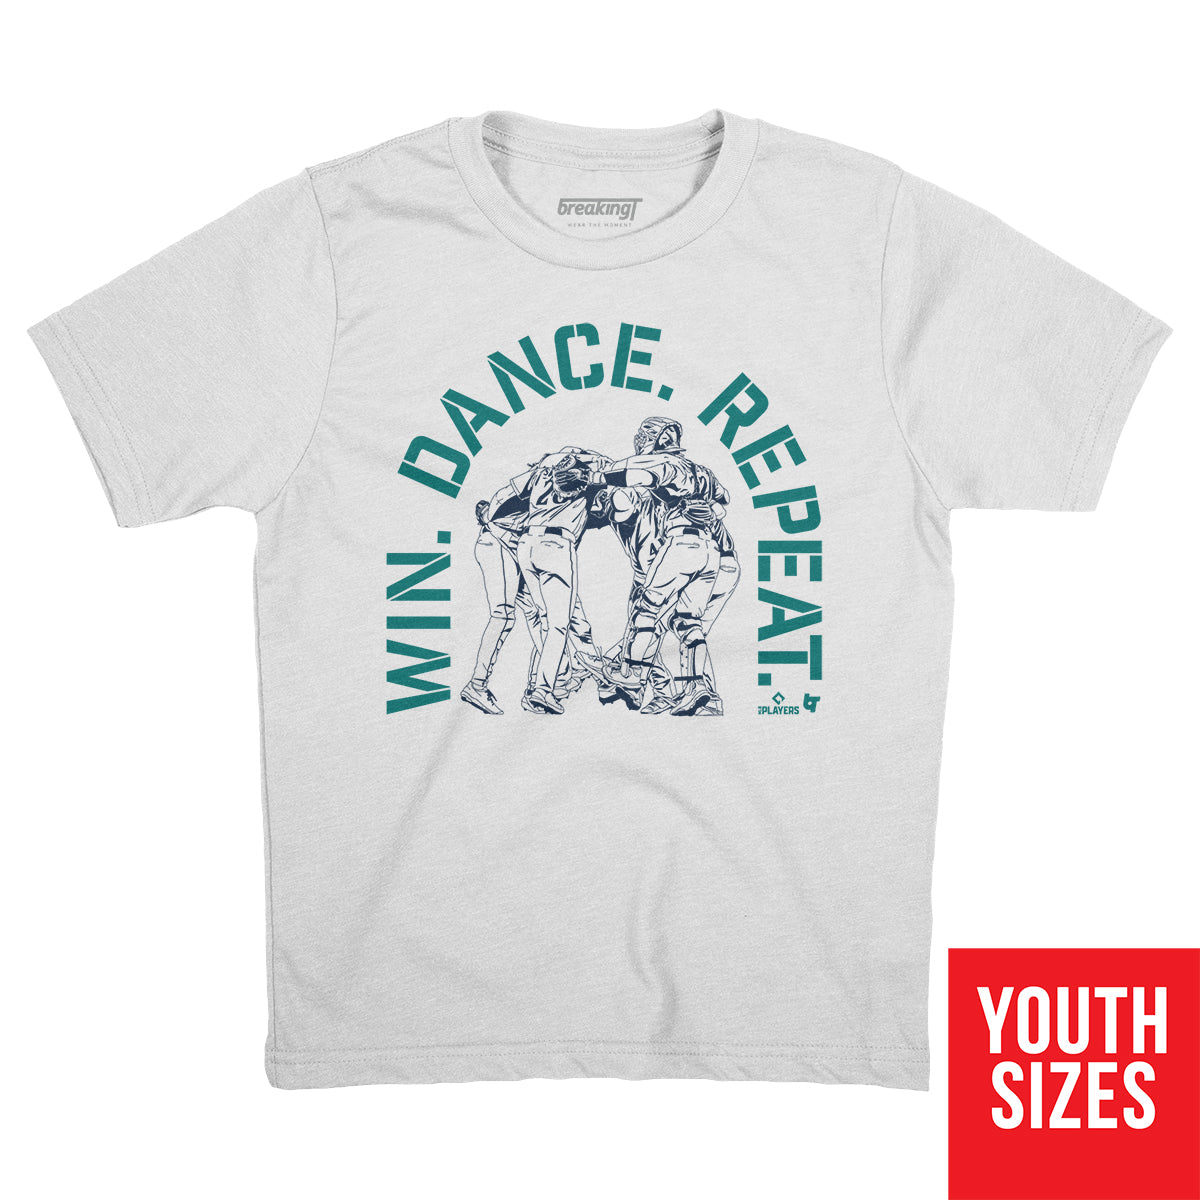 Unisex Very Important Tee ® by District-Queen City Dance Academy